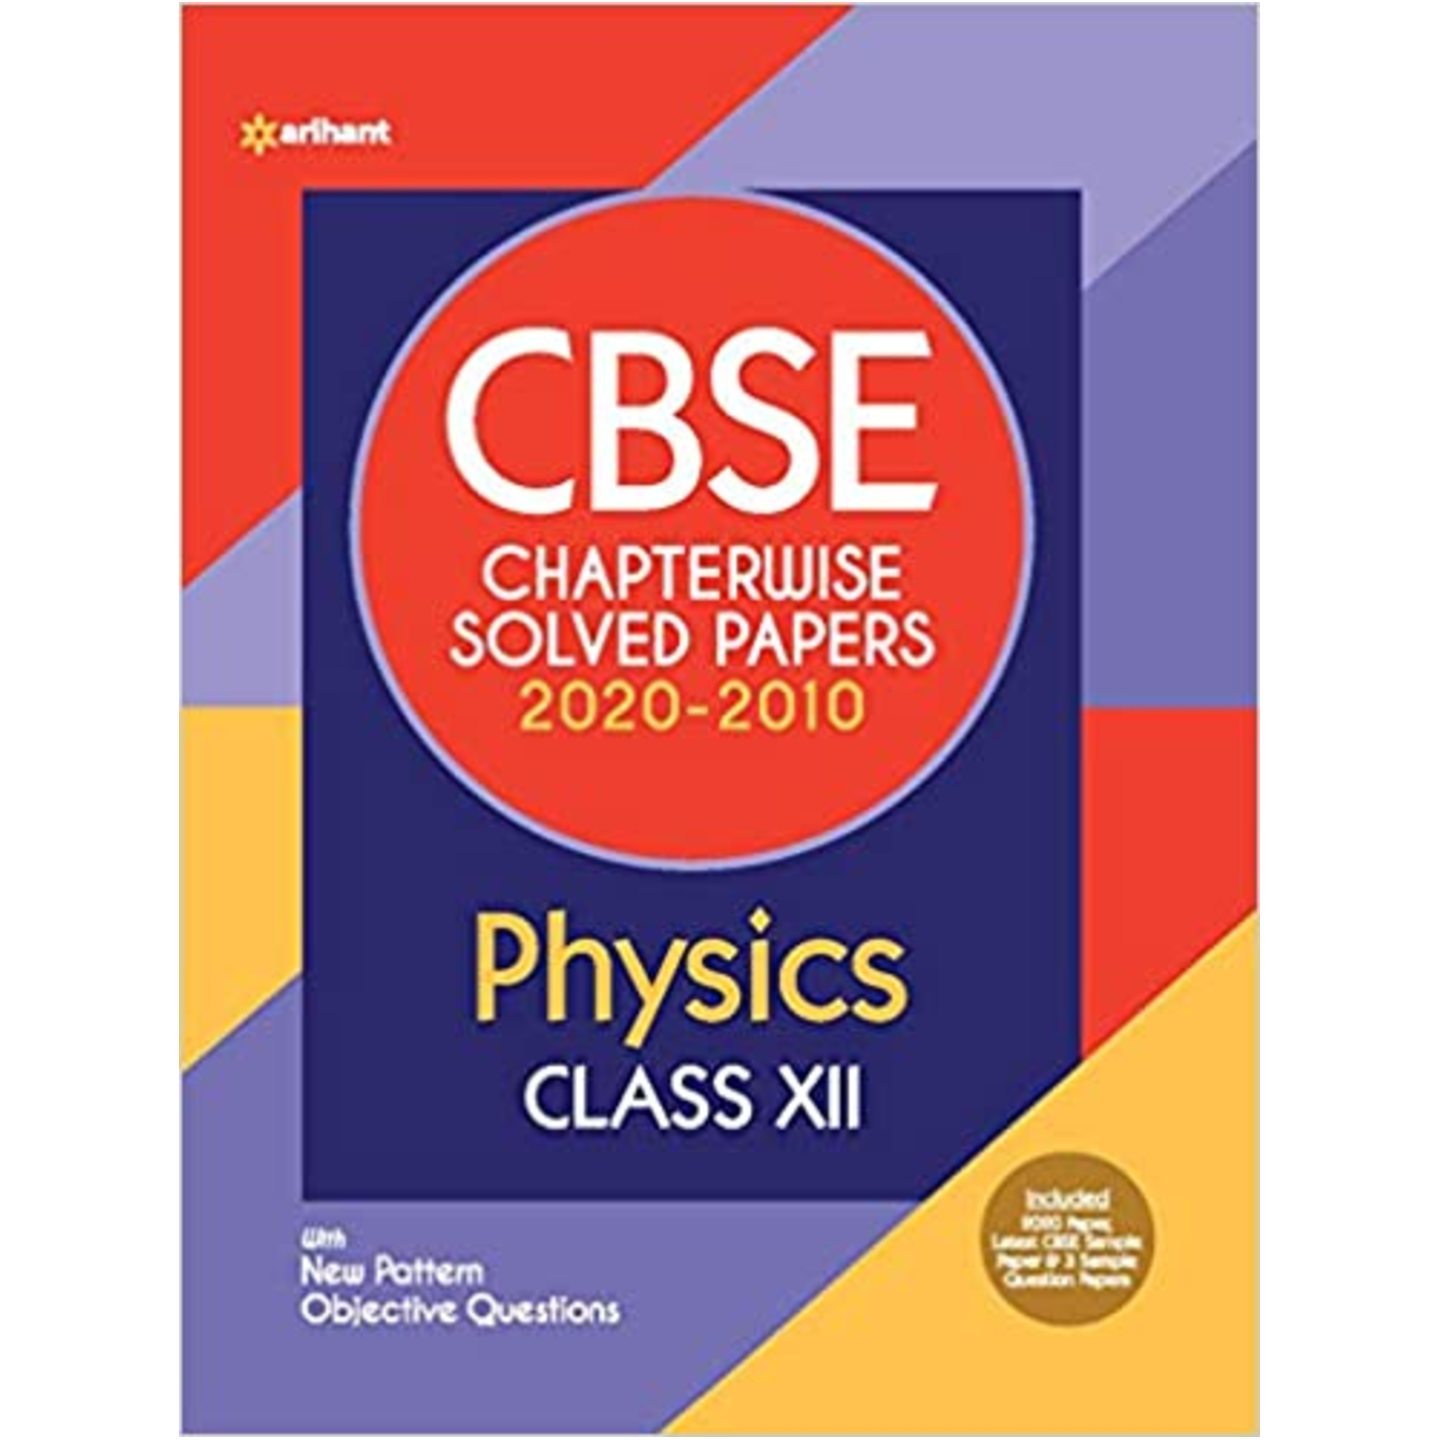 CBSE Physics Chapterwise Solved Papers Class 12 ARIHANT